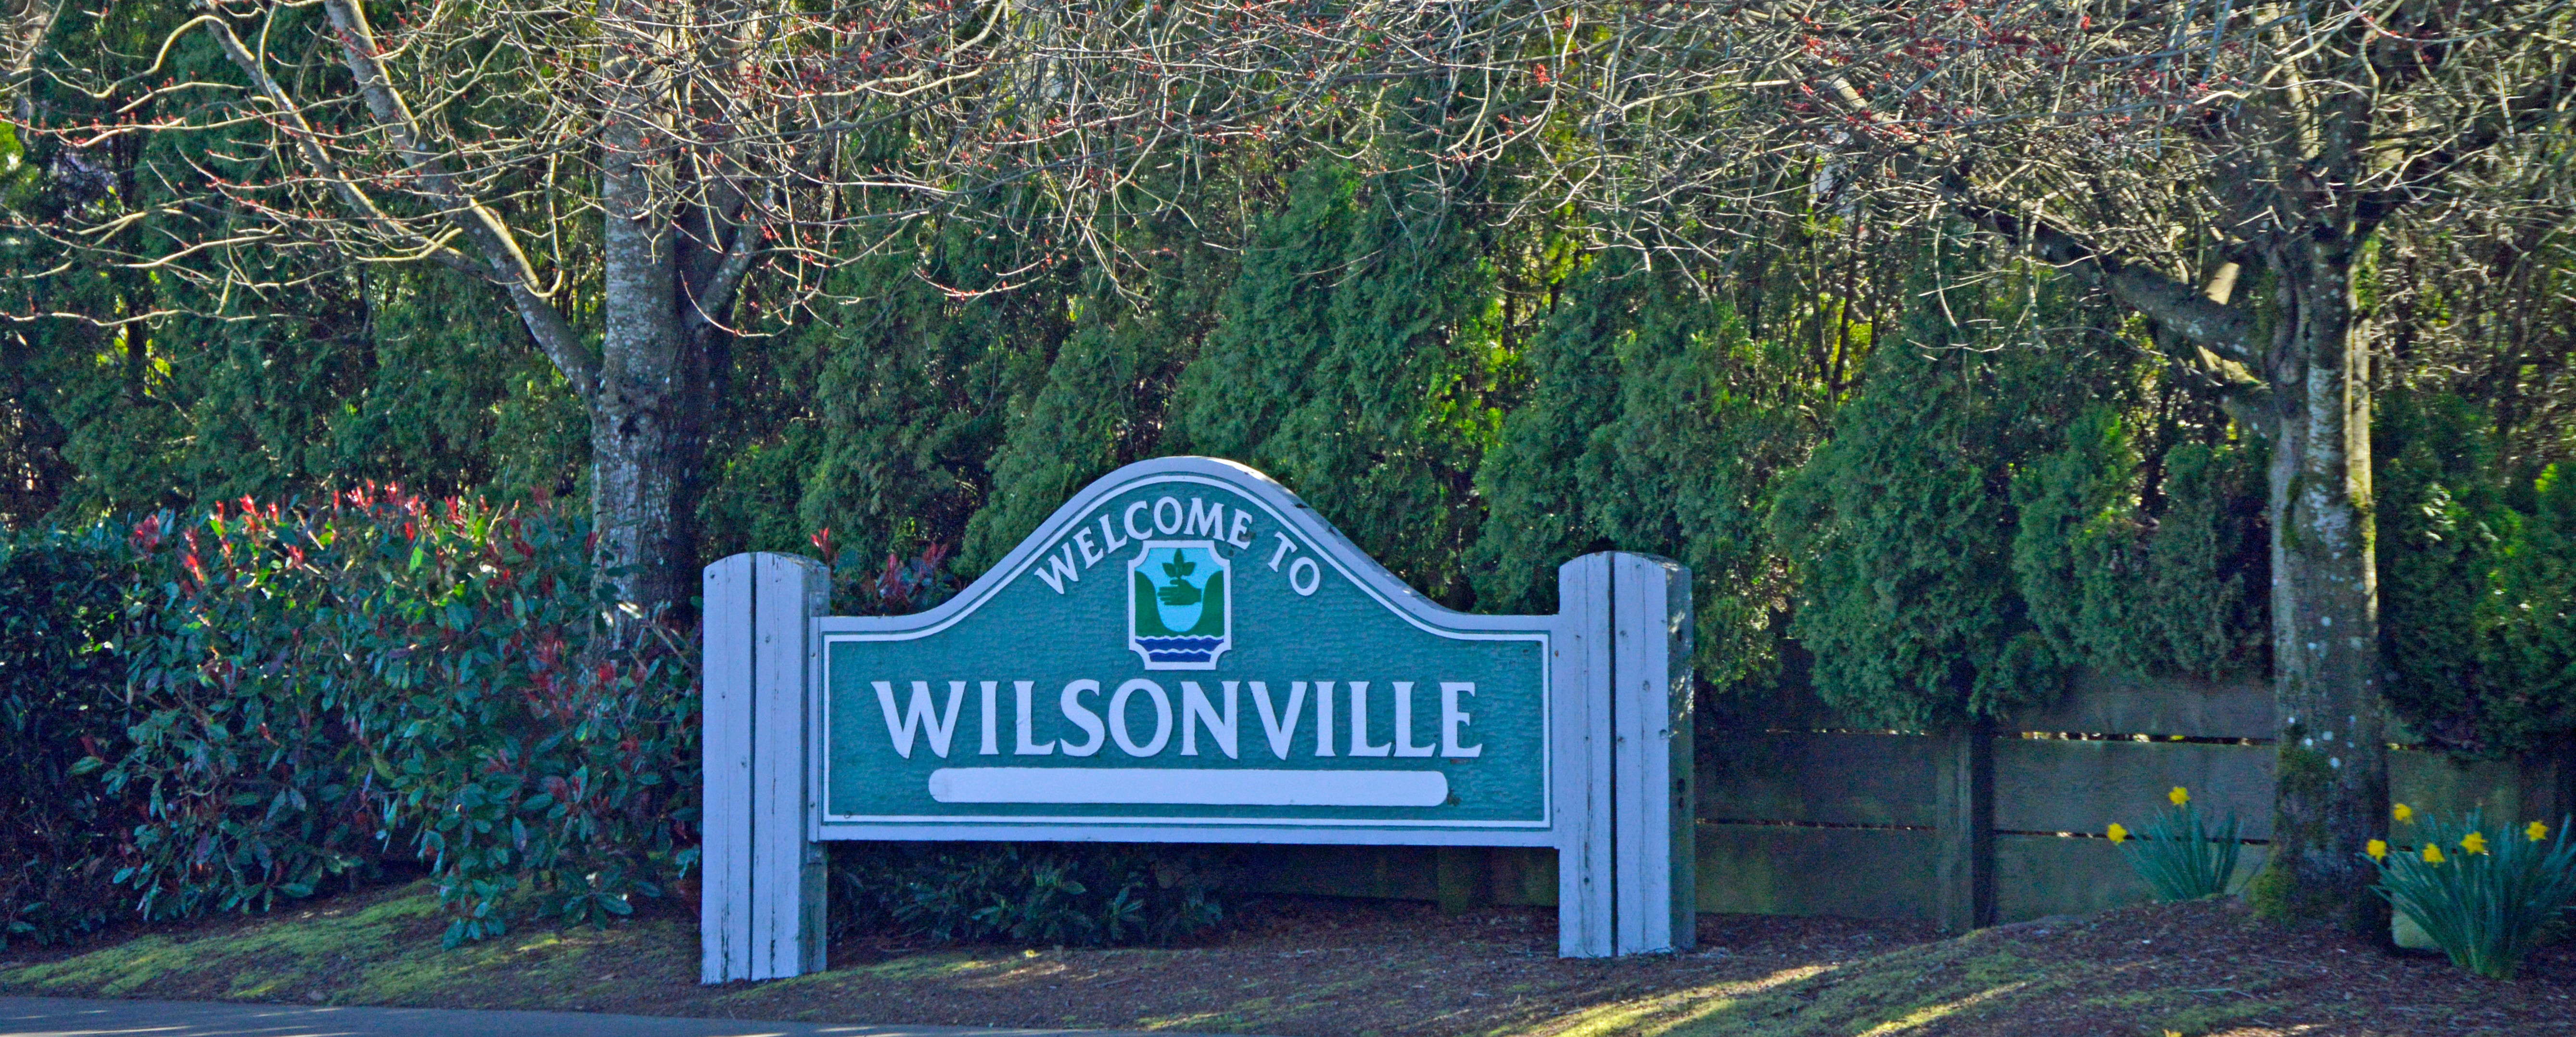 1-welcome-to-wilsonville-oregon-the-kelly-group-real-estate